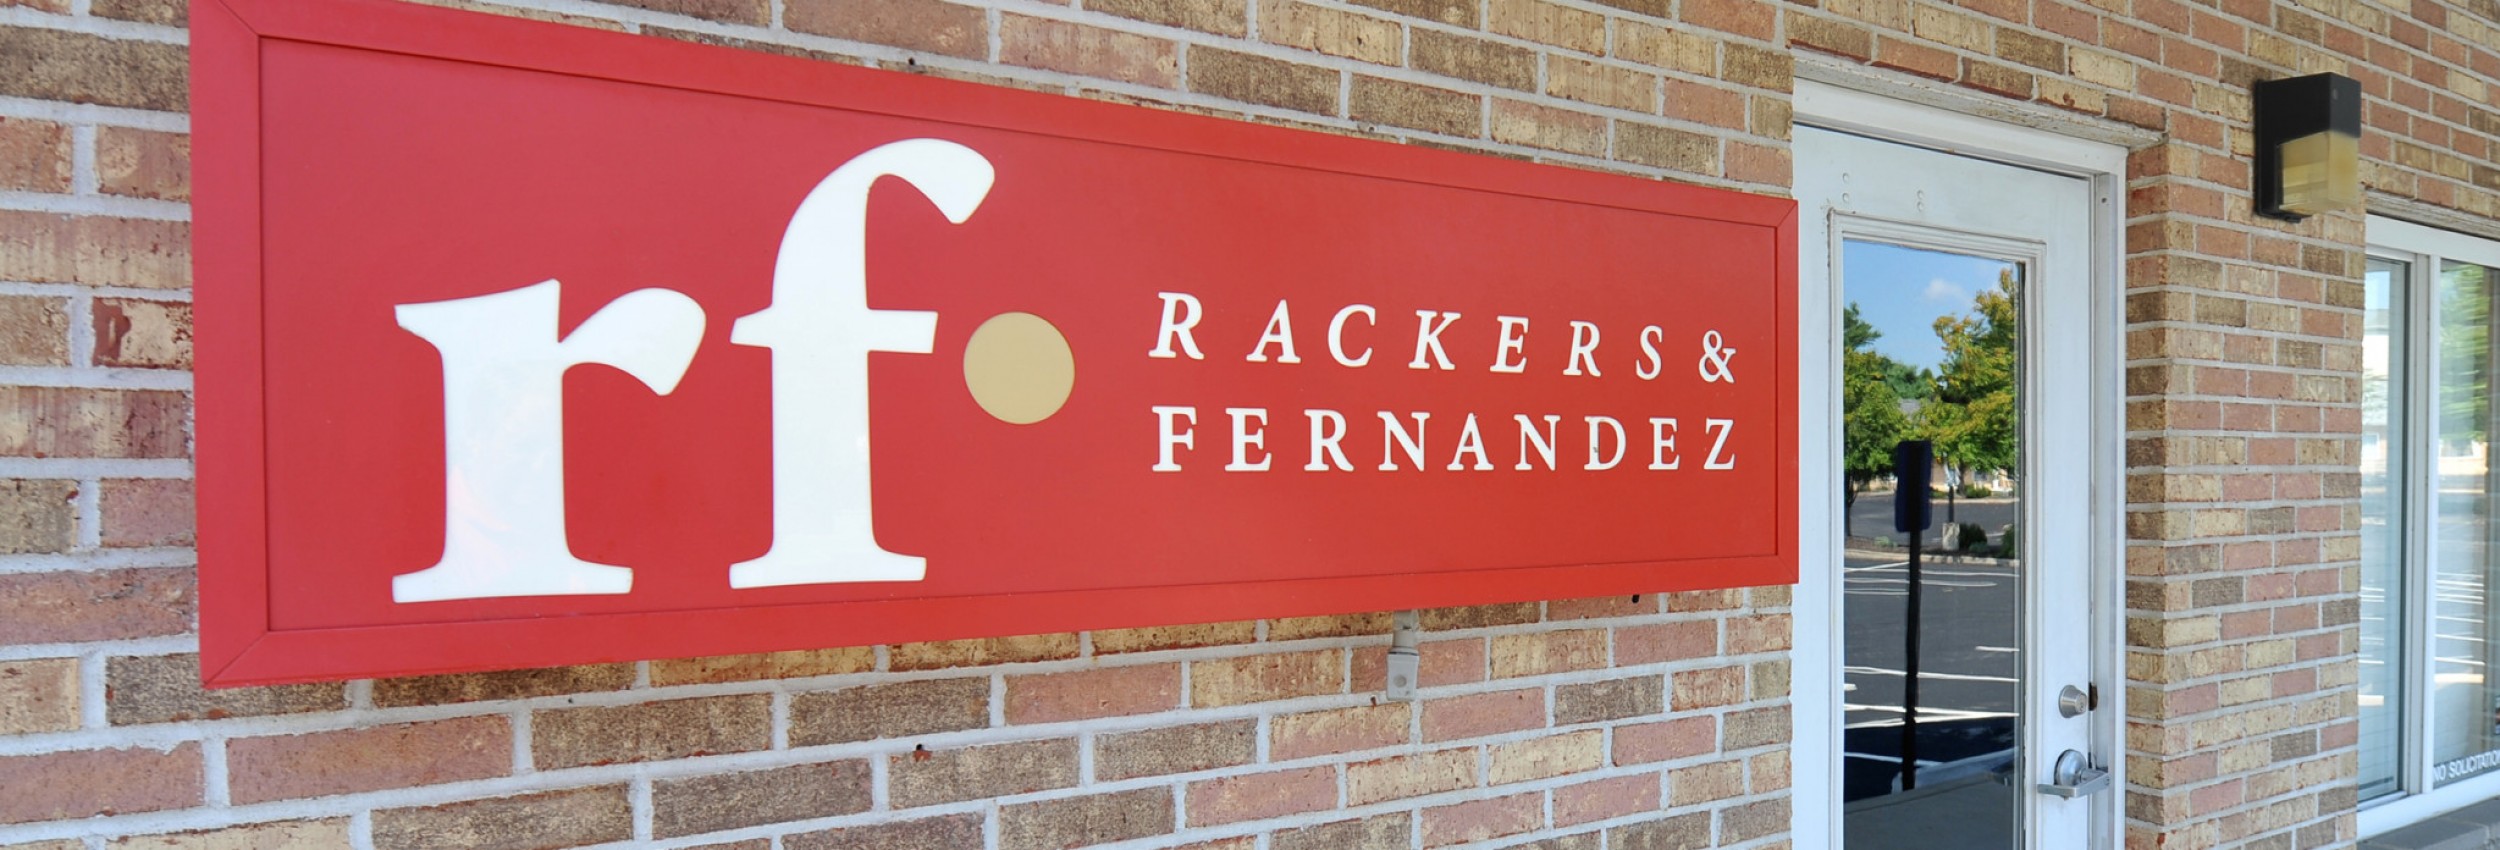 Rackers and Fernandez Sign